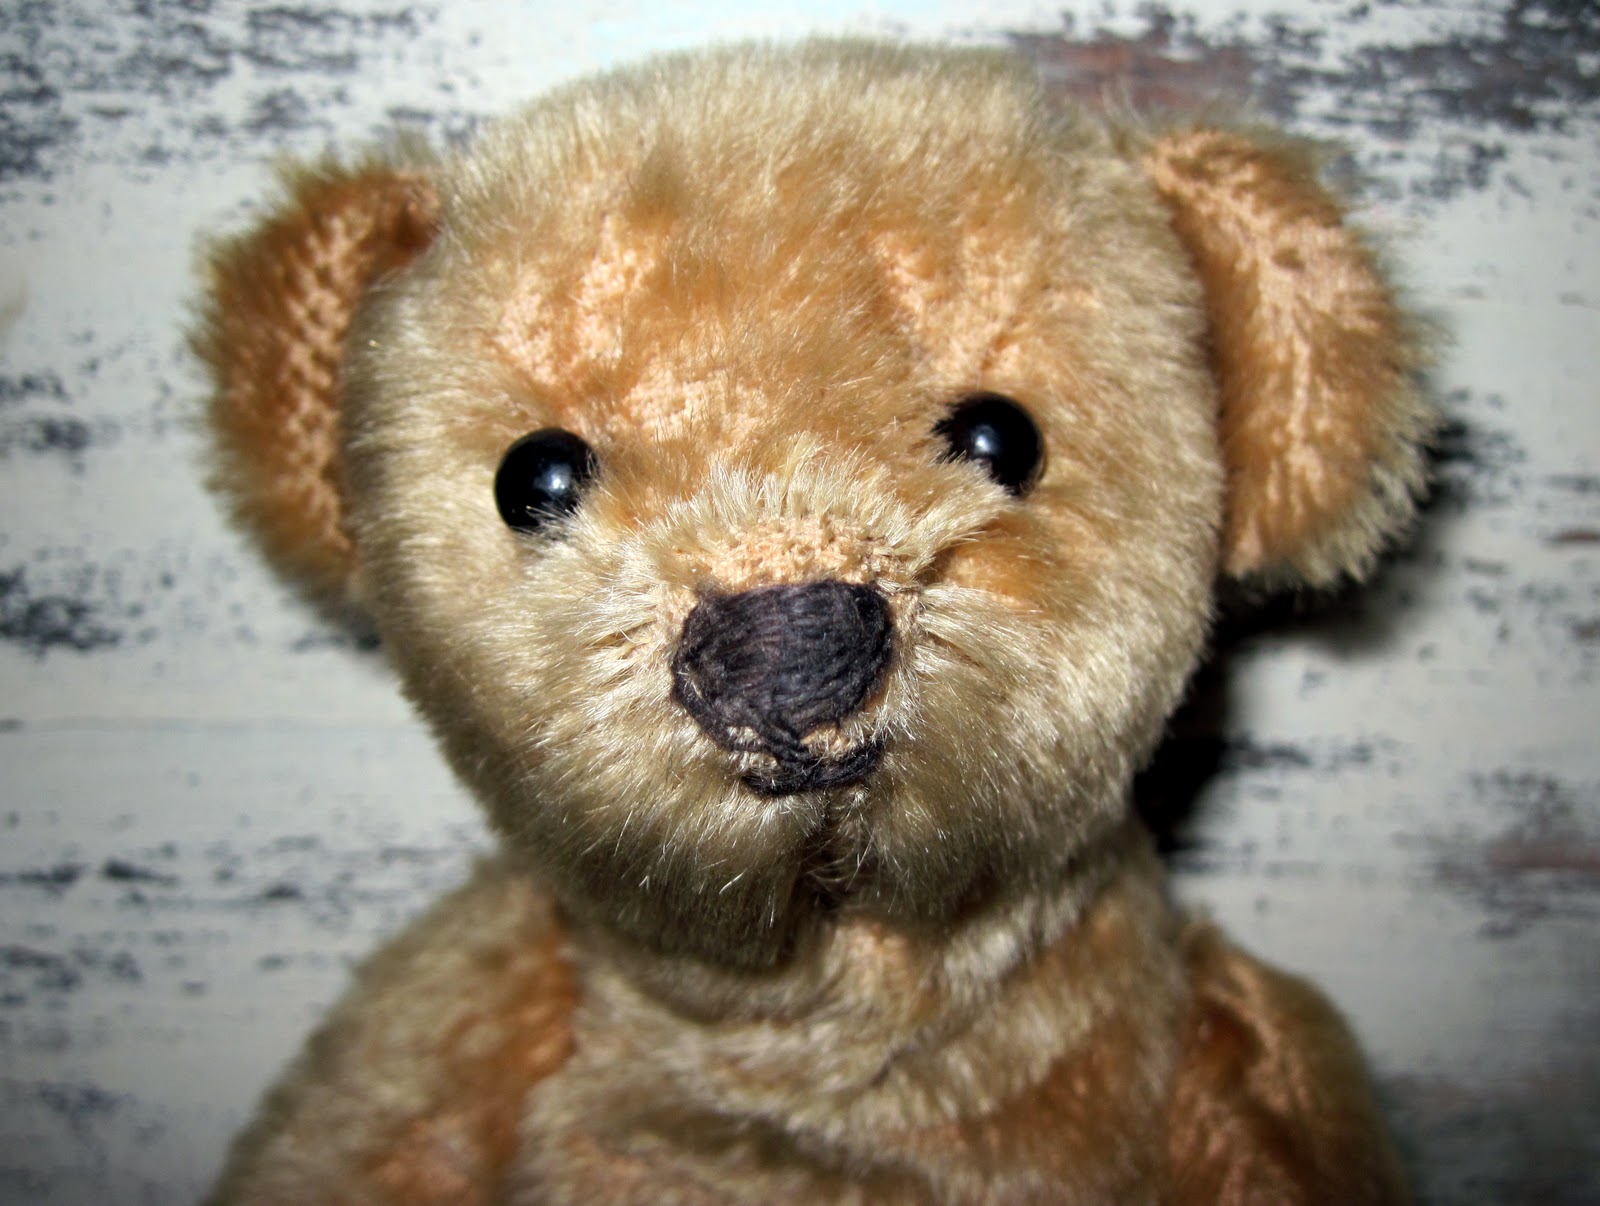 Tracy's Toys (and Some Other Stuff): Big Nosed Antique American Bear